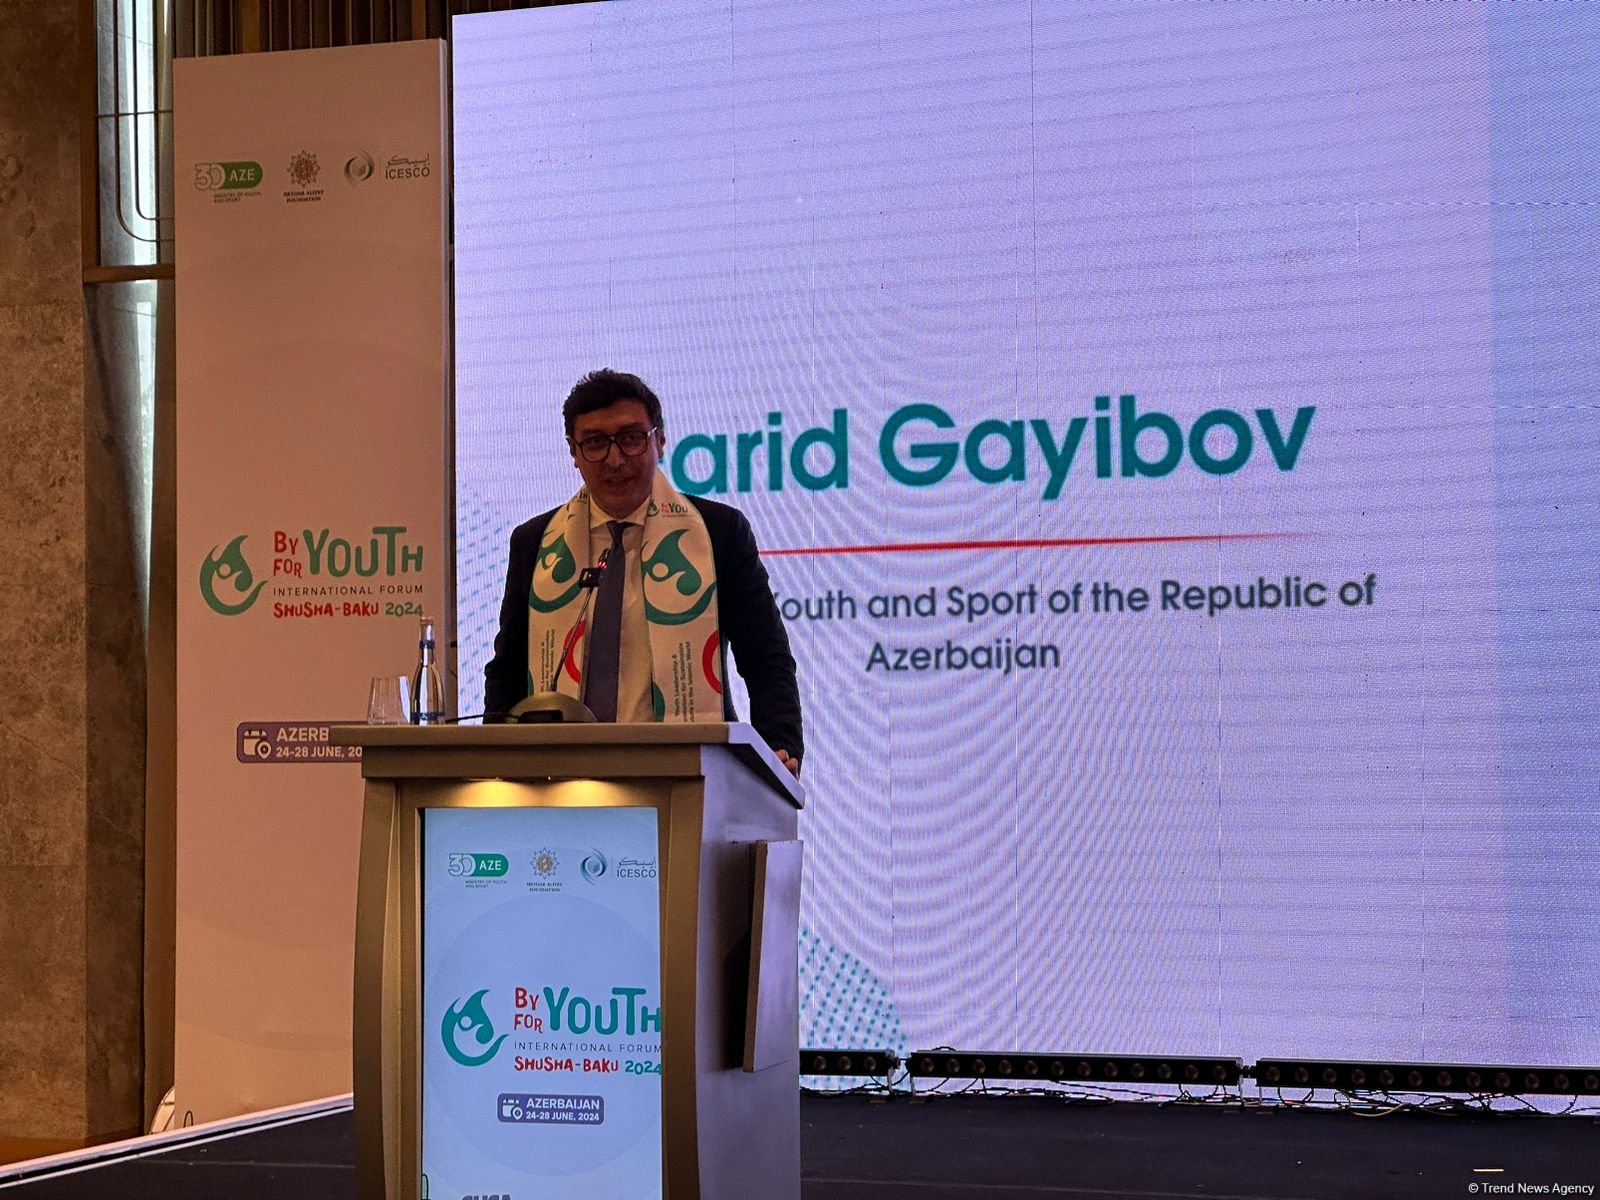 Various opportunities available for youth development in regions - Azerbaijani minister